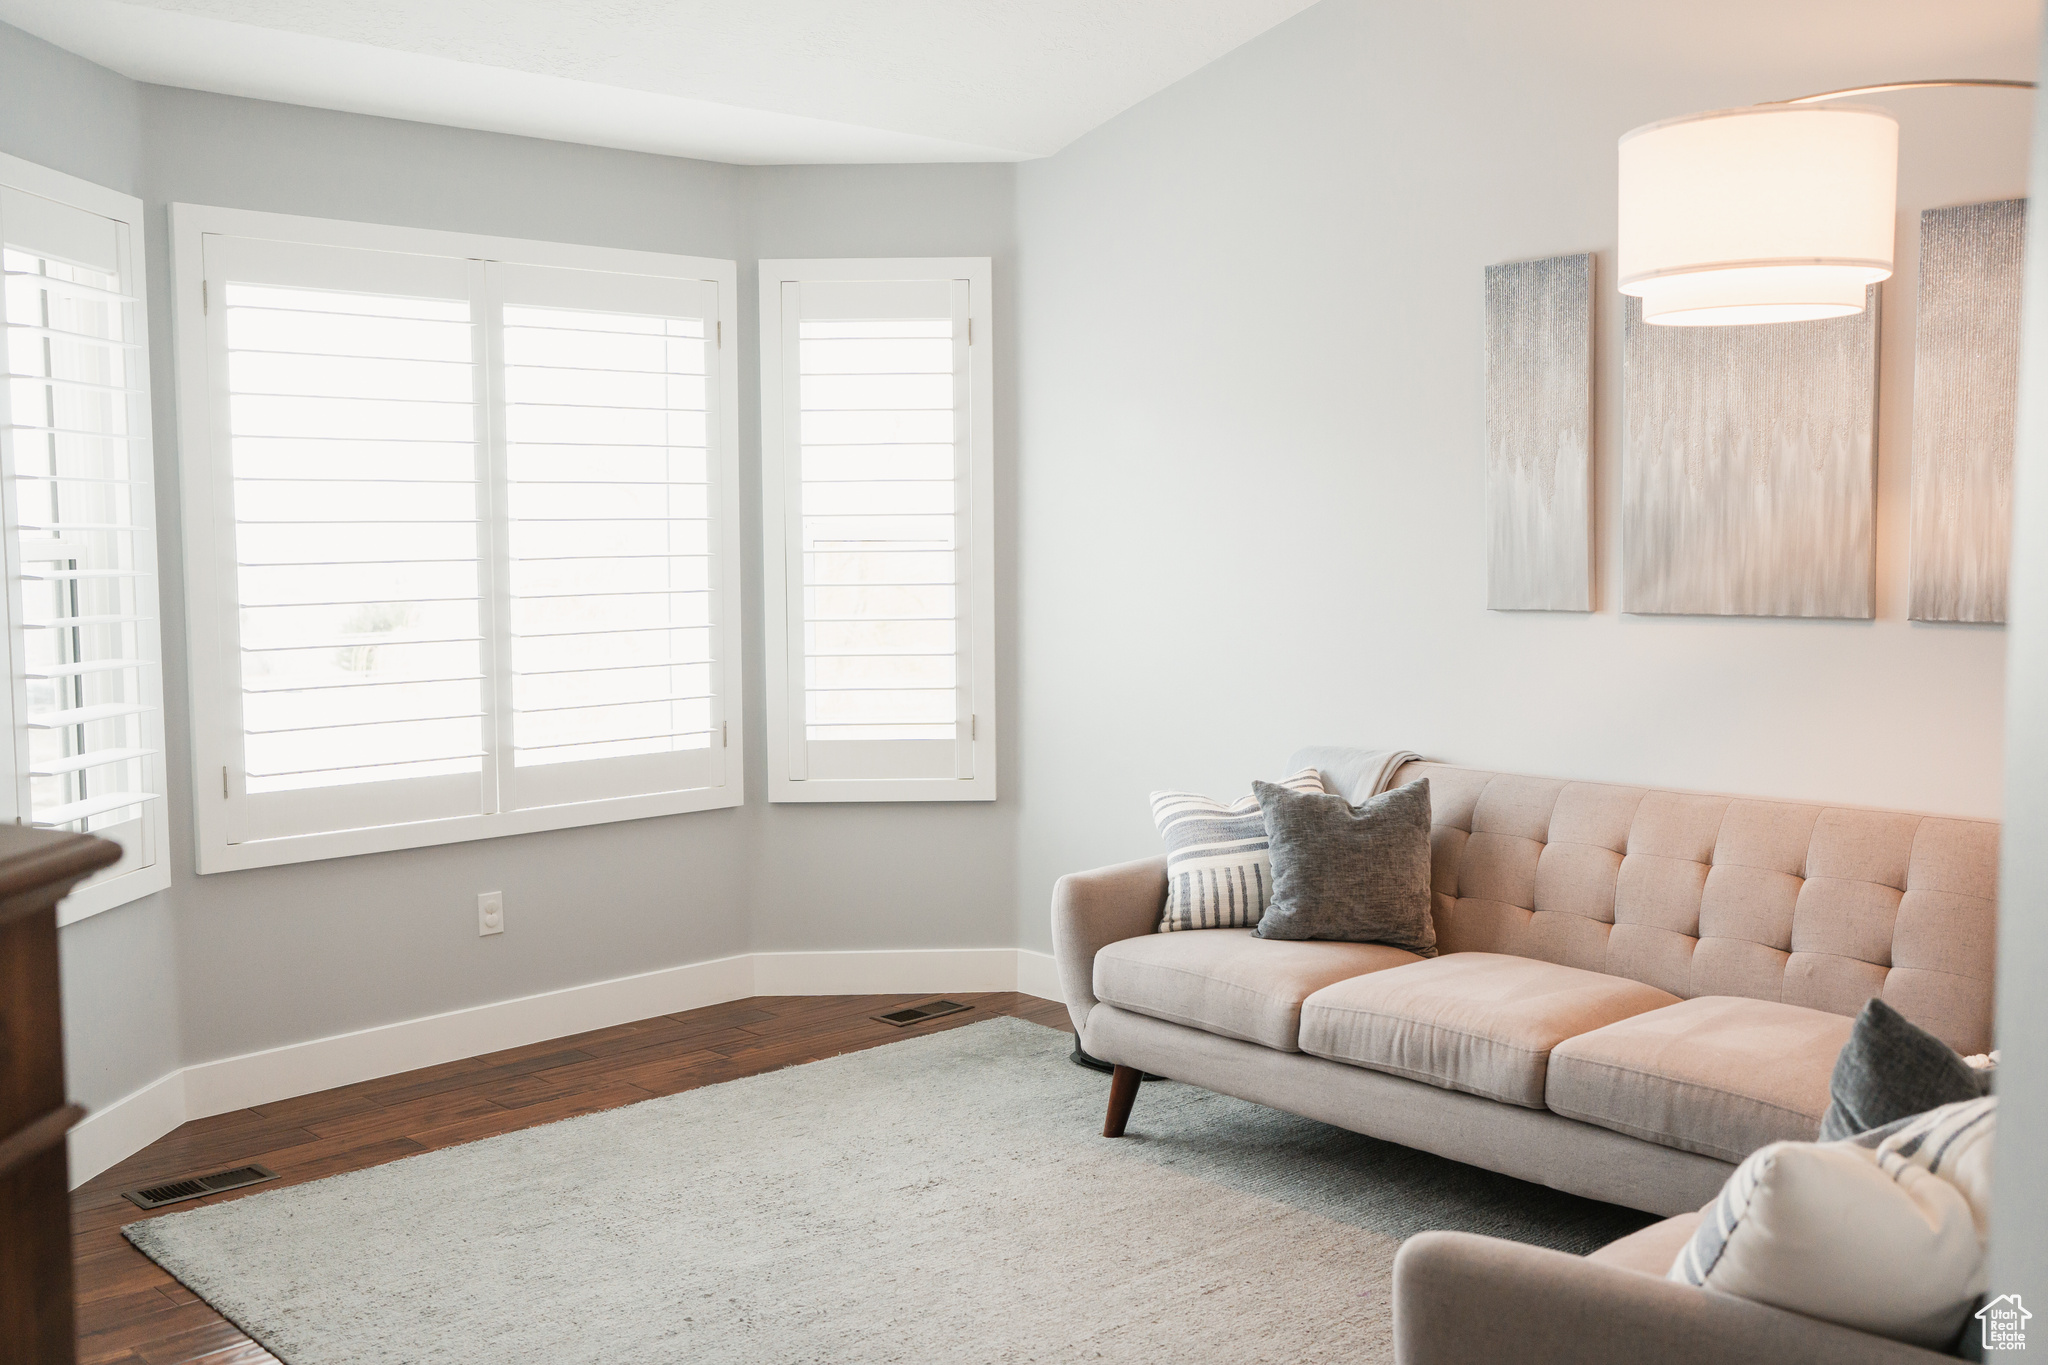 Inviting Living Room with Bay Window & Plantation Shutters